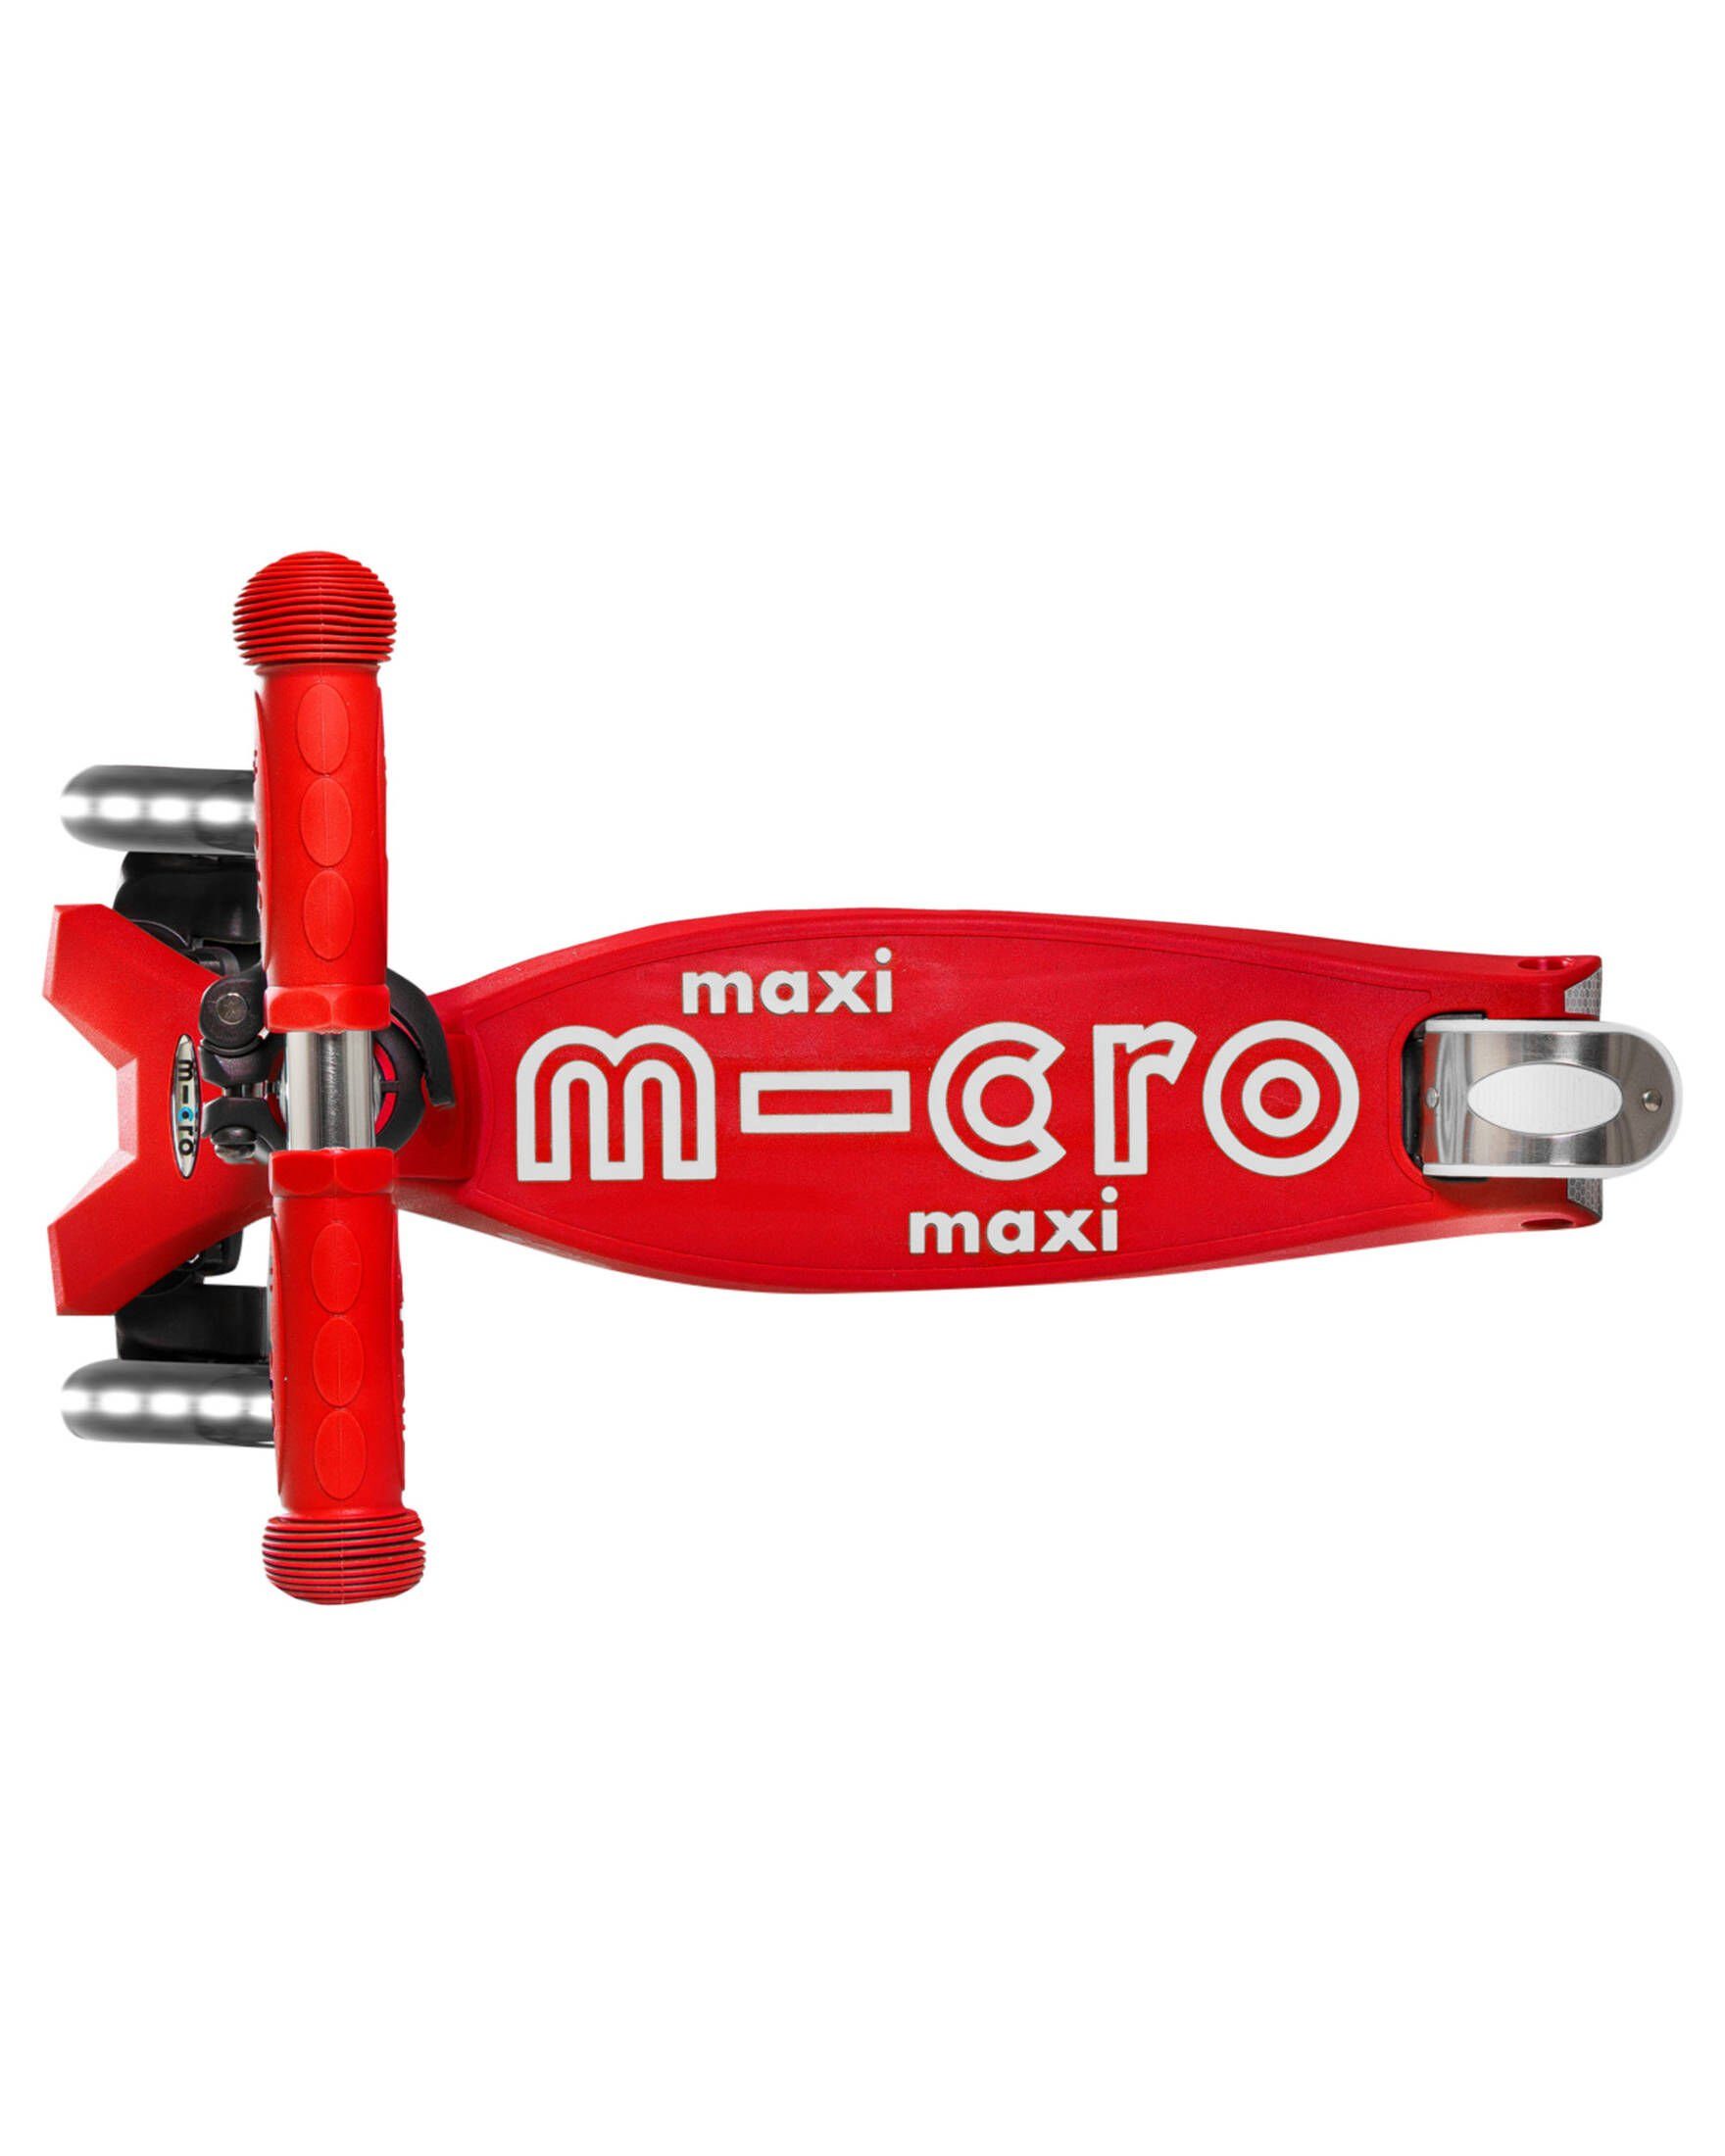 tlg) Micro (1 LED, Tretroller MICRO MAXI Kinder Roller DELUXE